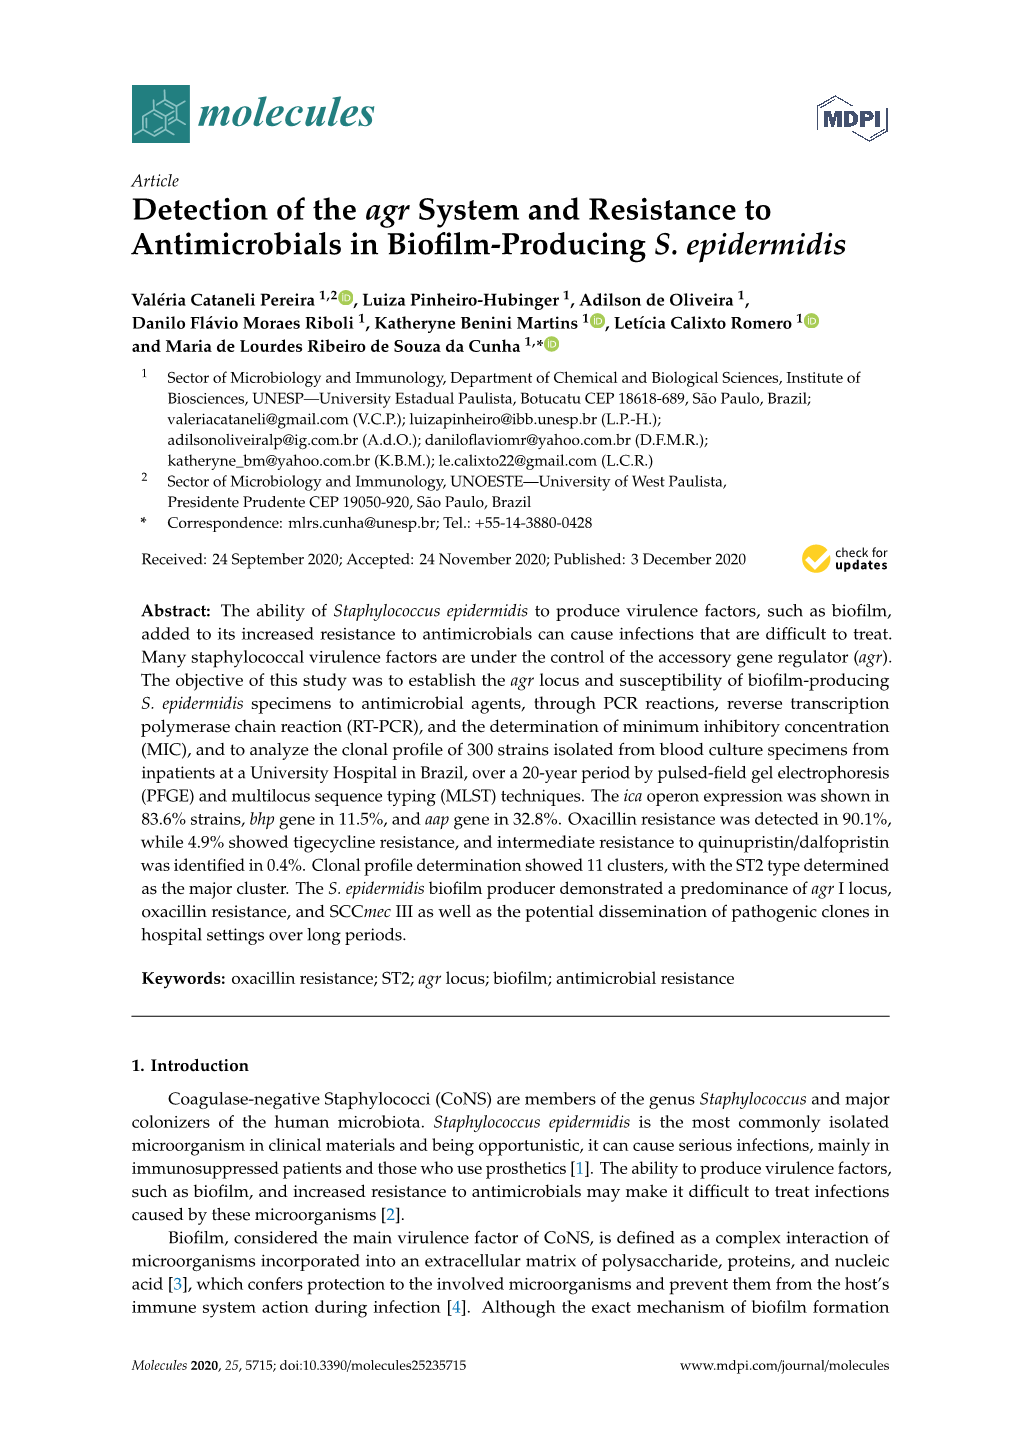 Detection of the Agr System and Resistance to Antimicrobials in Bioﬁlm-Producing S